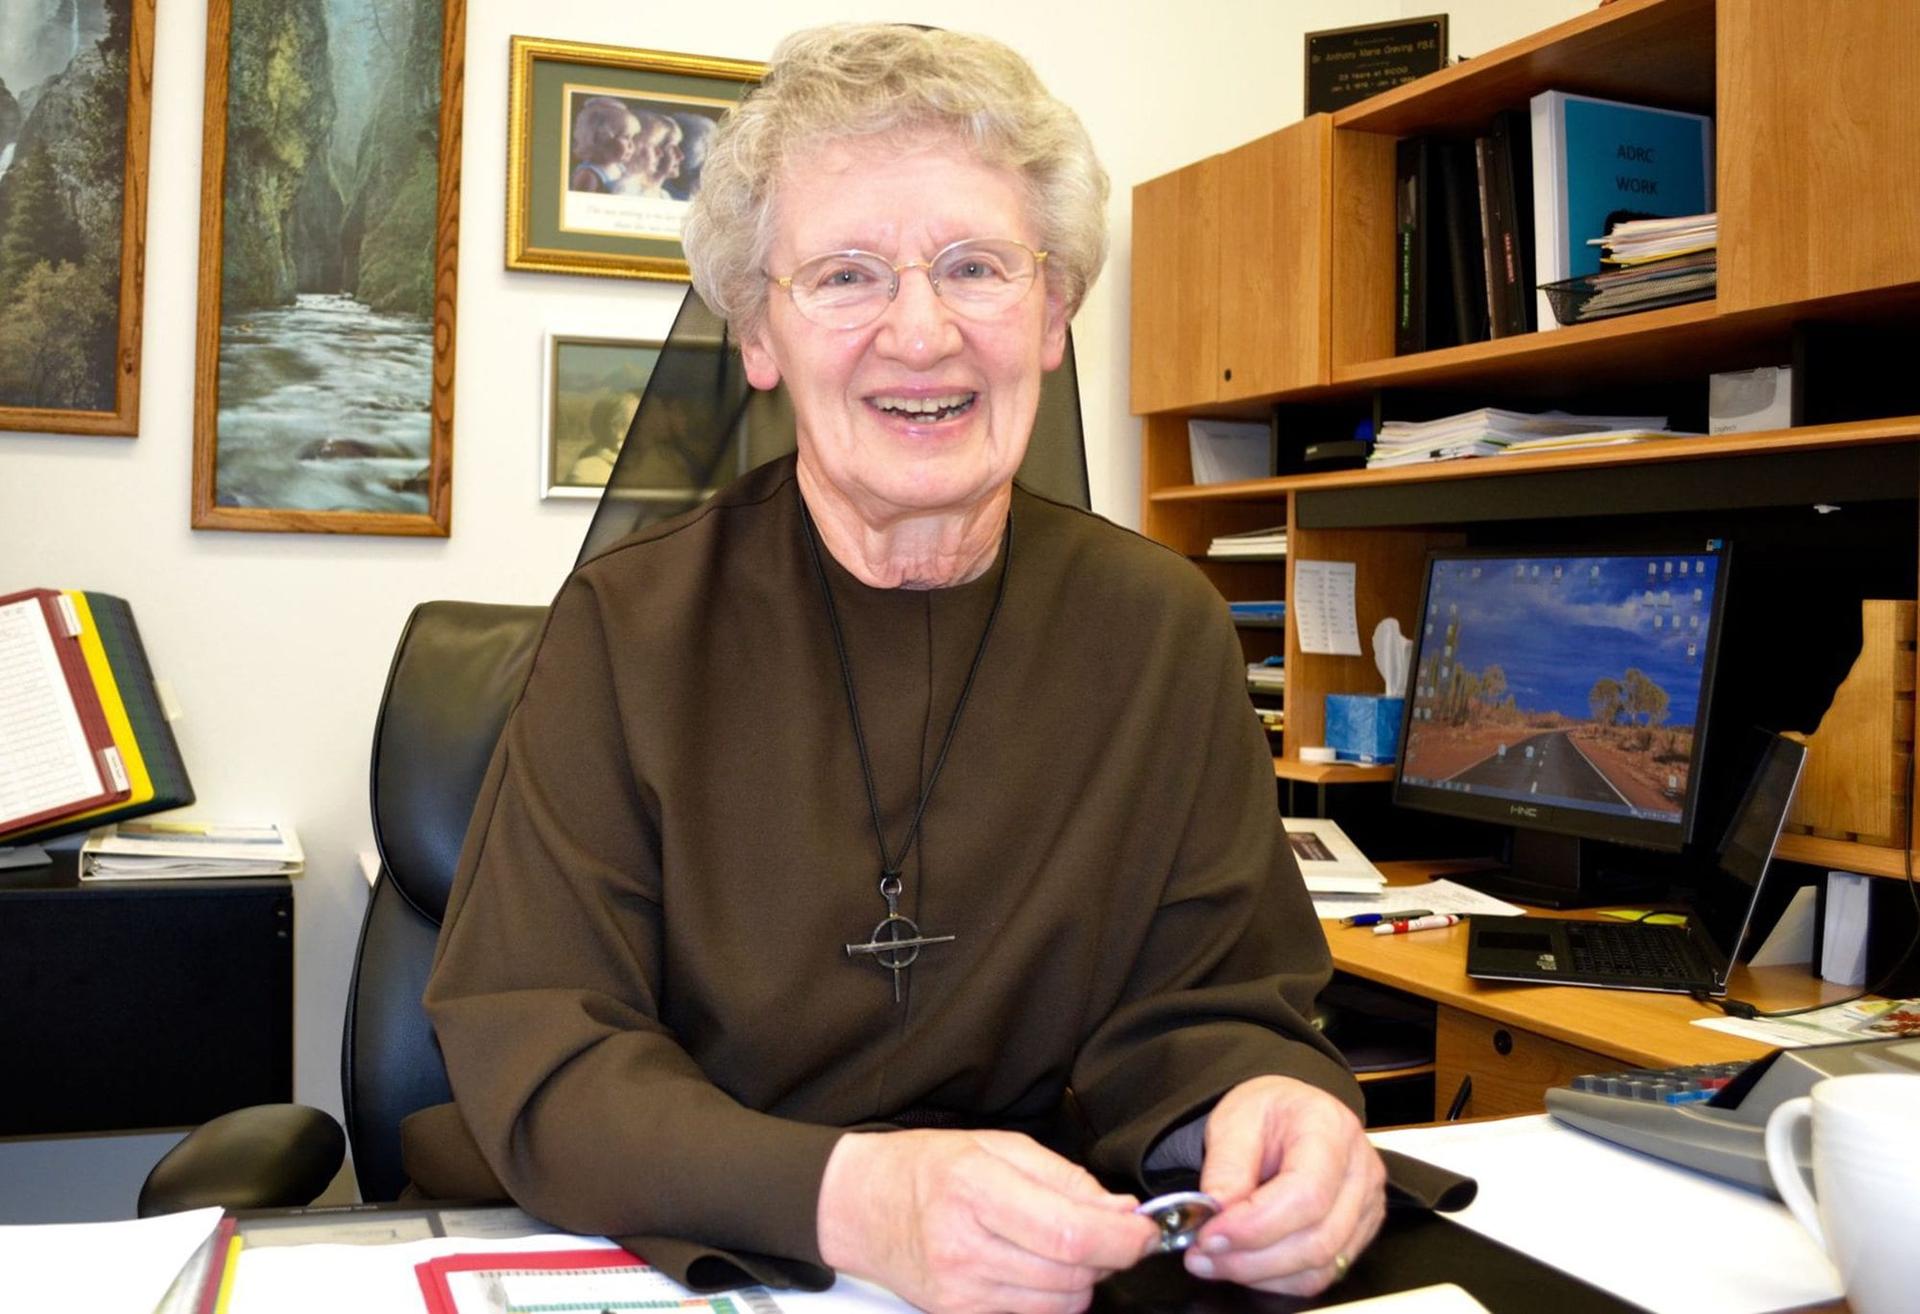 Nun steps down after 40 years of serving the elderly